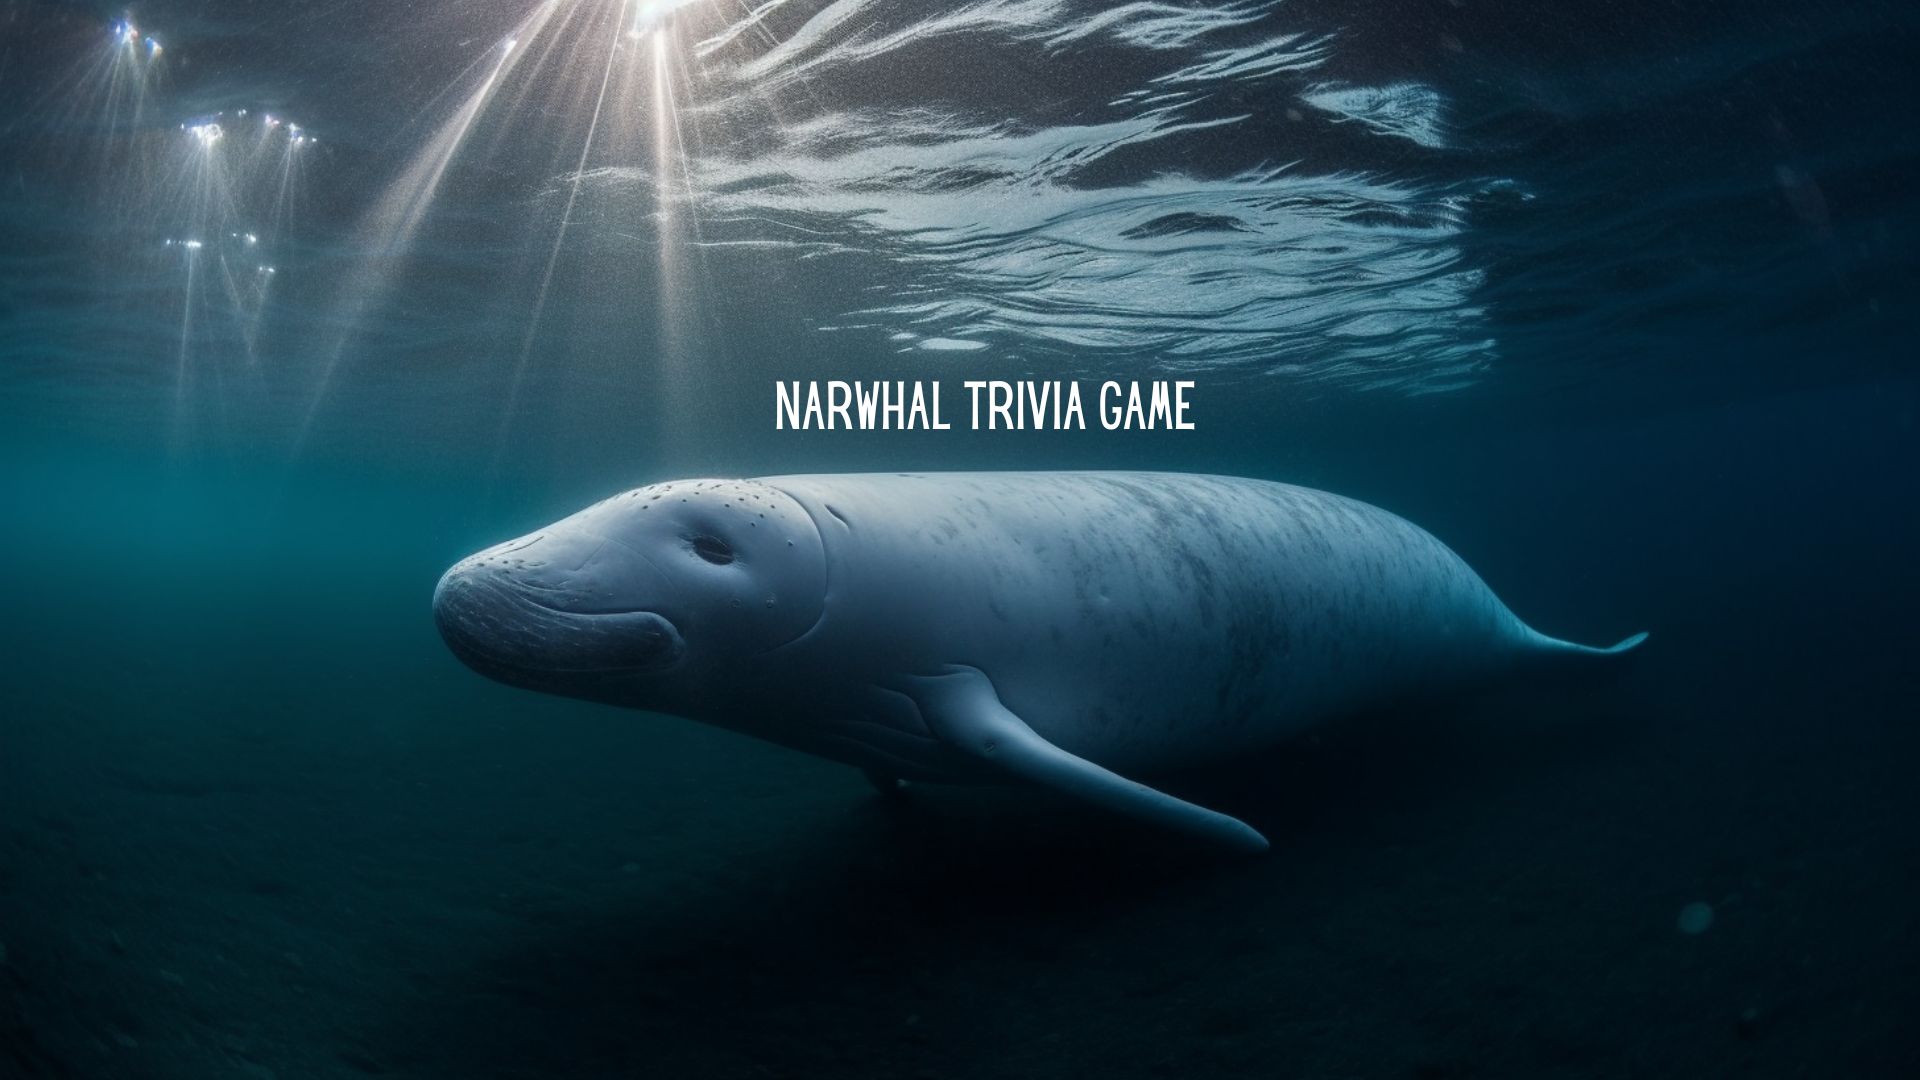 Narwhal Trivia Game